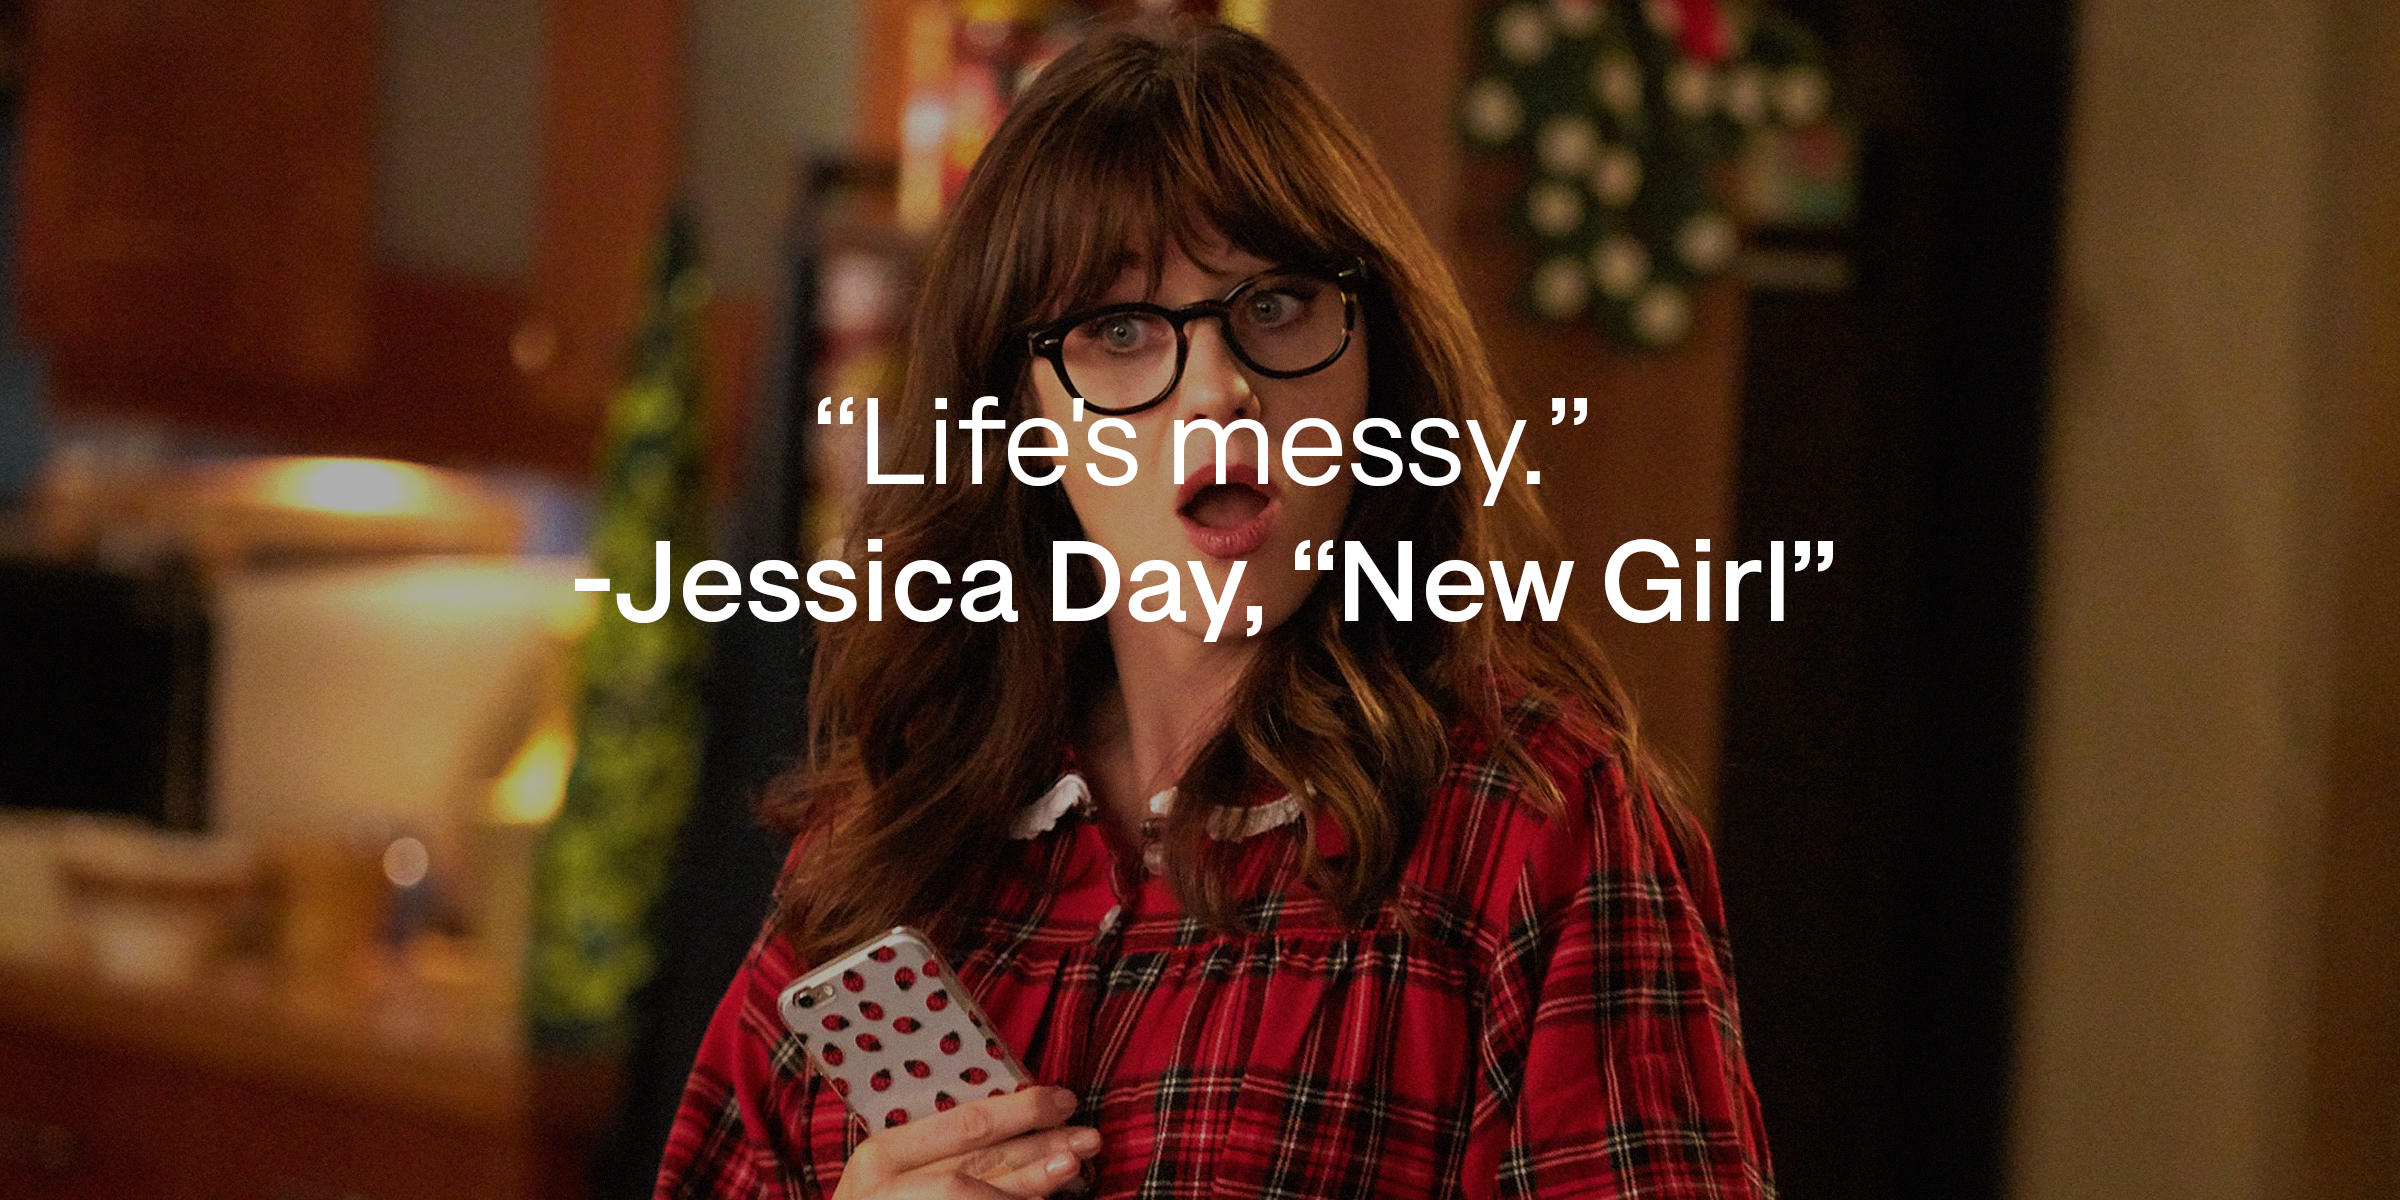 Jessica Day’s image with quote from “New Girl”: “Life's messy.” | Source: facebook.com/OfficialNewGirl